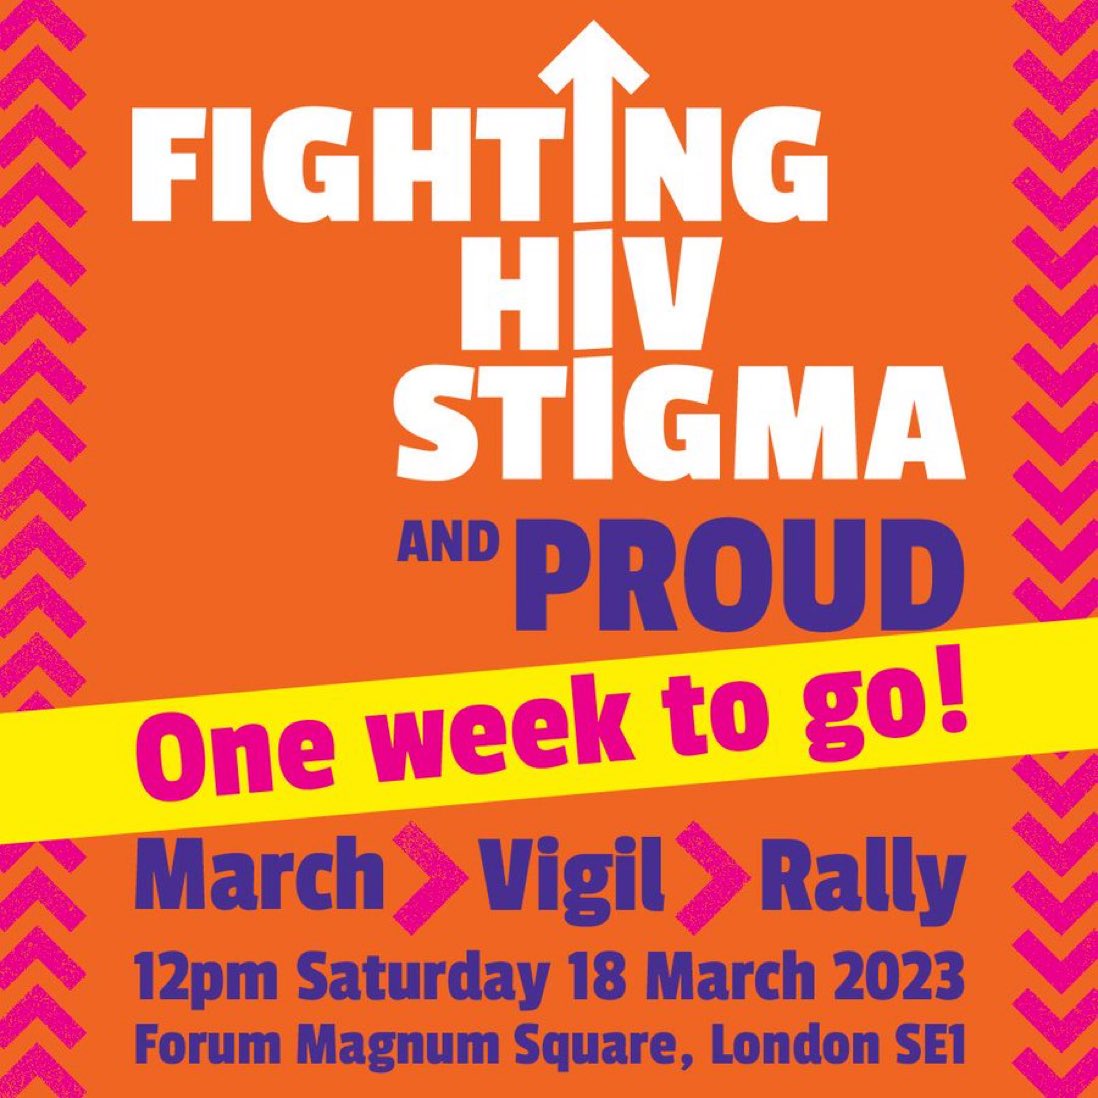 As someone living with HIV I’m affected by HIV Stigma.

Join me a week from today to March against HIV stigma.

I’m on treatment and live a normal life. 

I own HIV it doesn’t own me. 

#UequalsU #CantPassItOn #HIV #Stigma